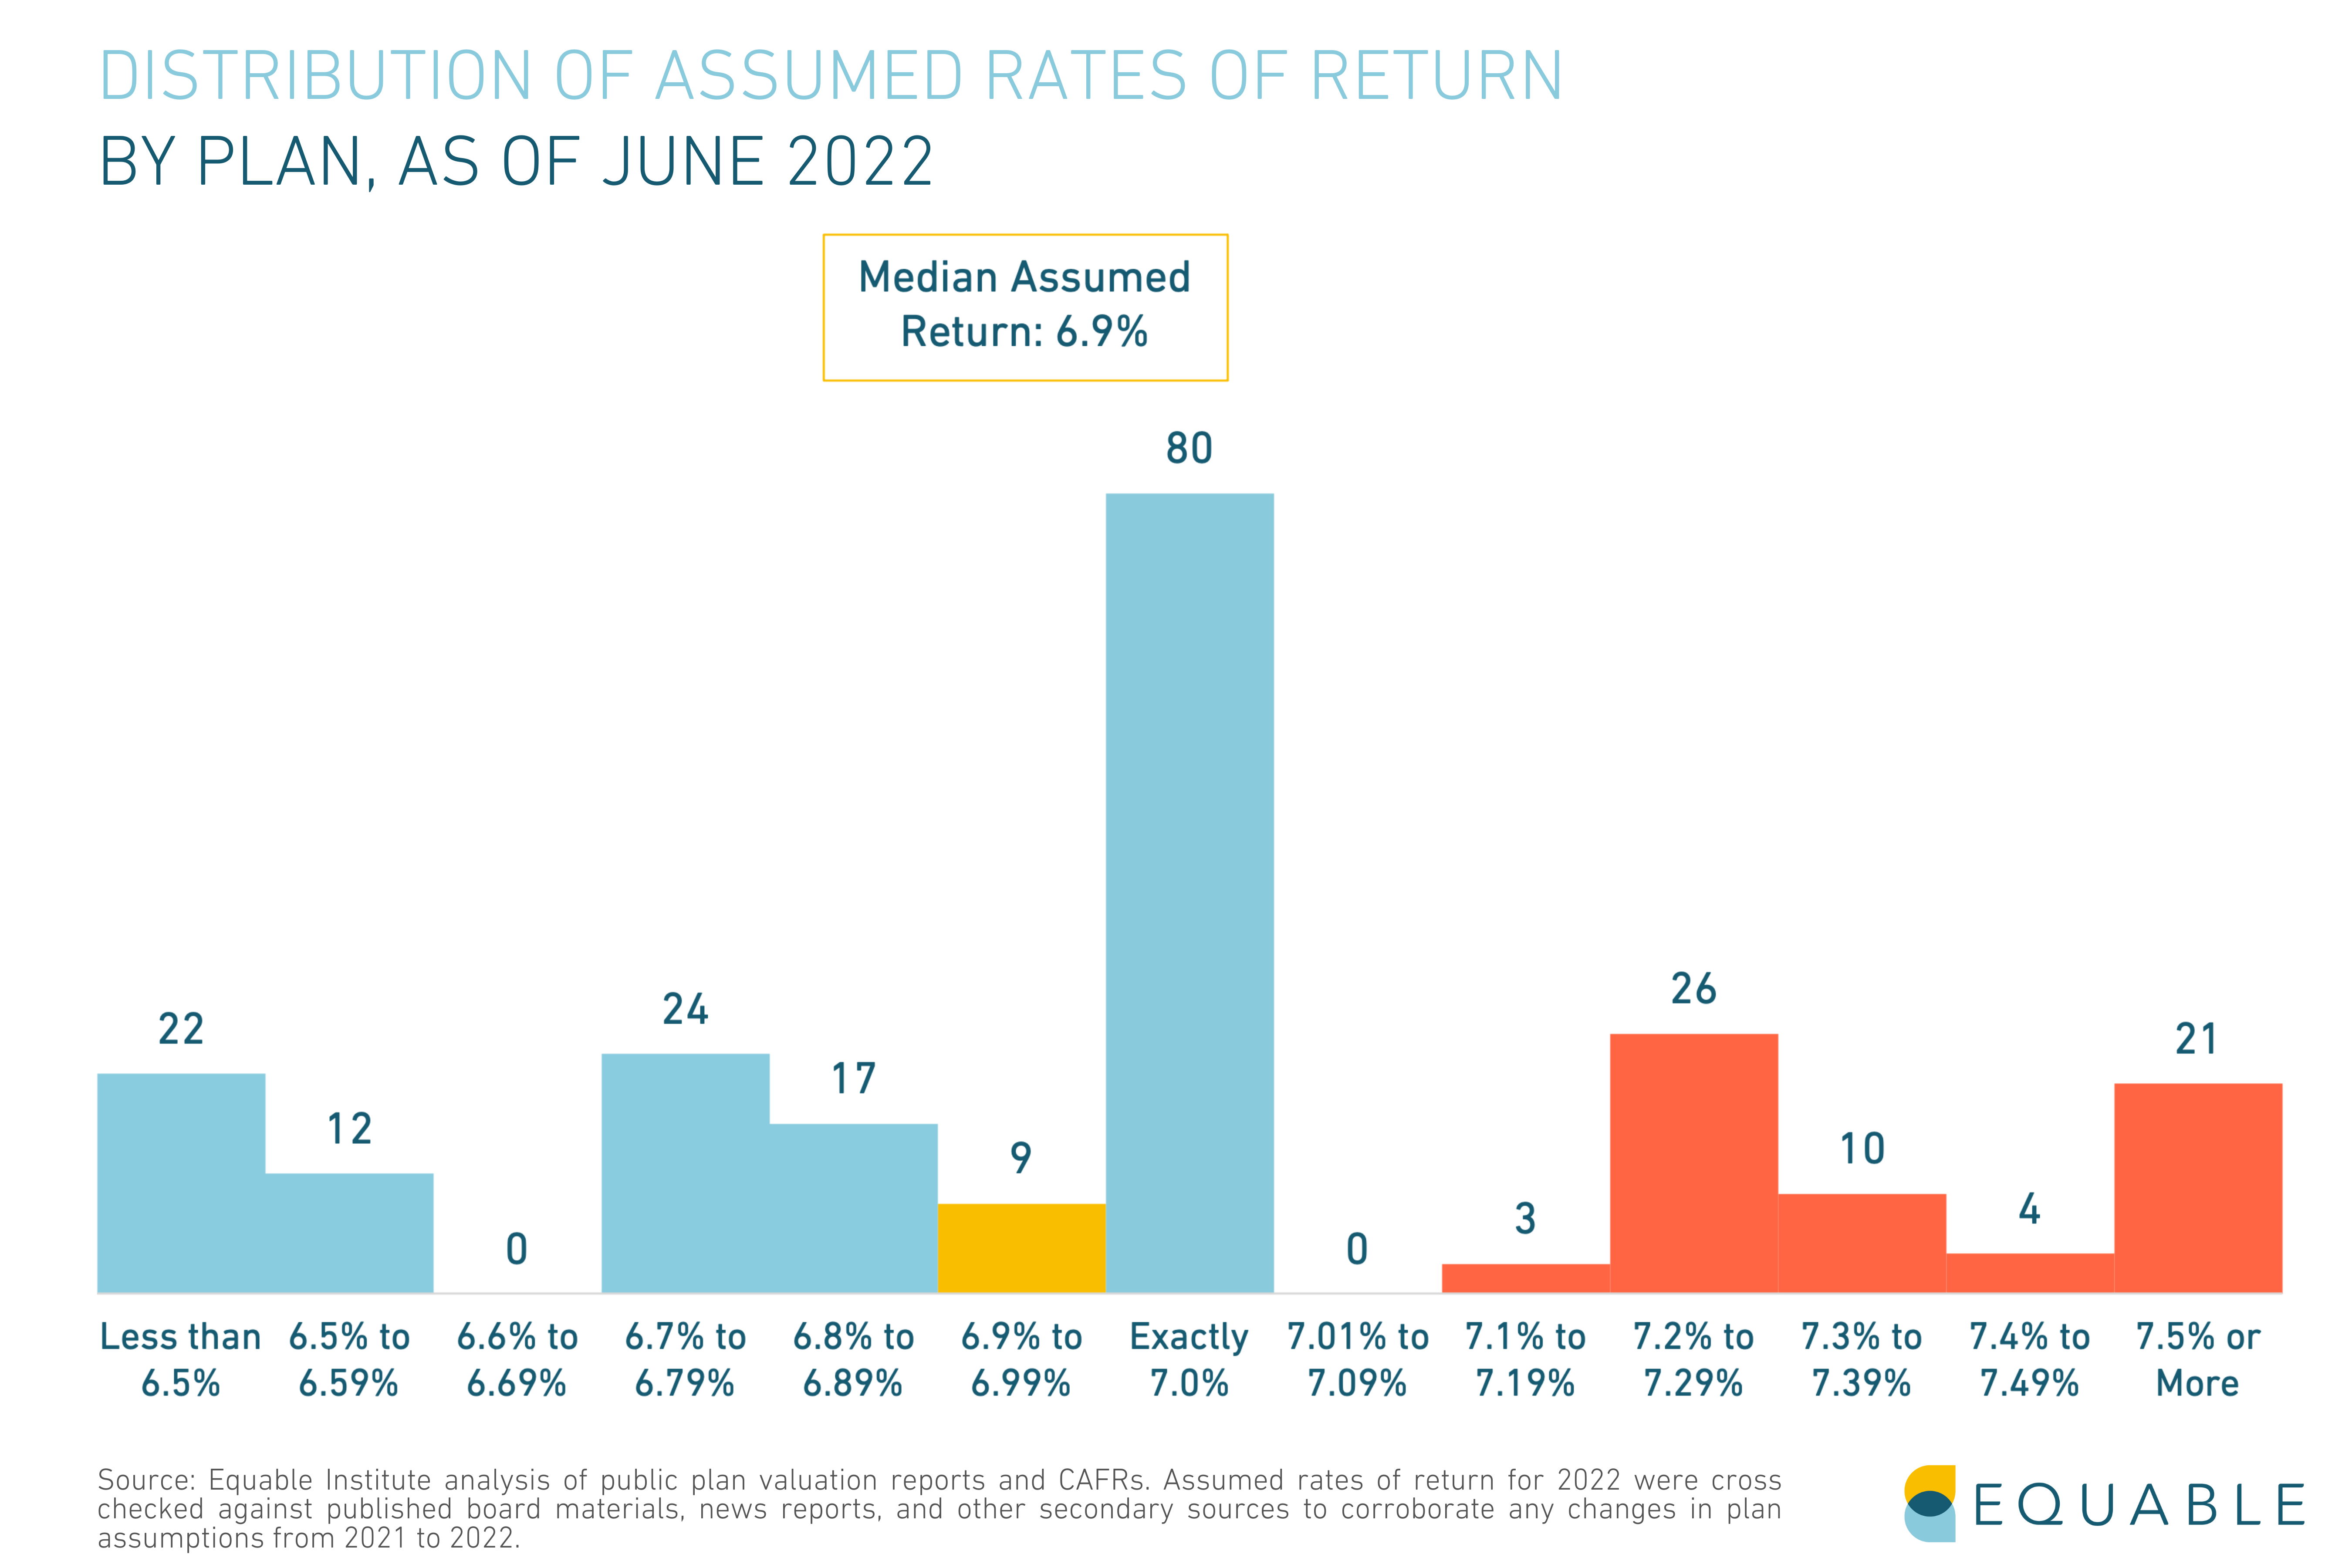 A bar graph depicting the distribution of assumed rates of return by plan as of June 2022